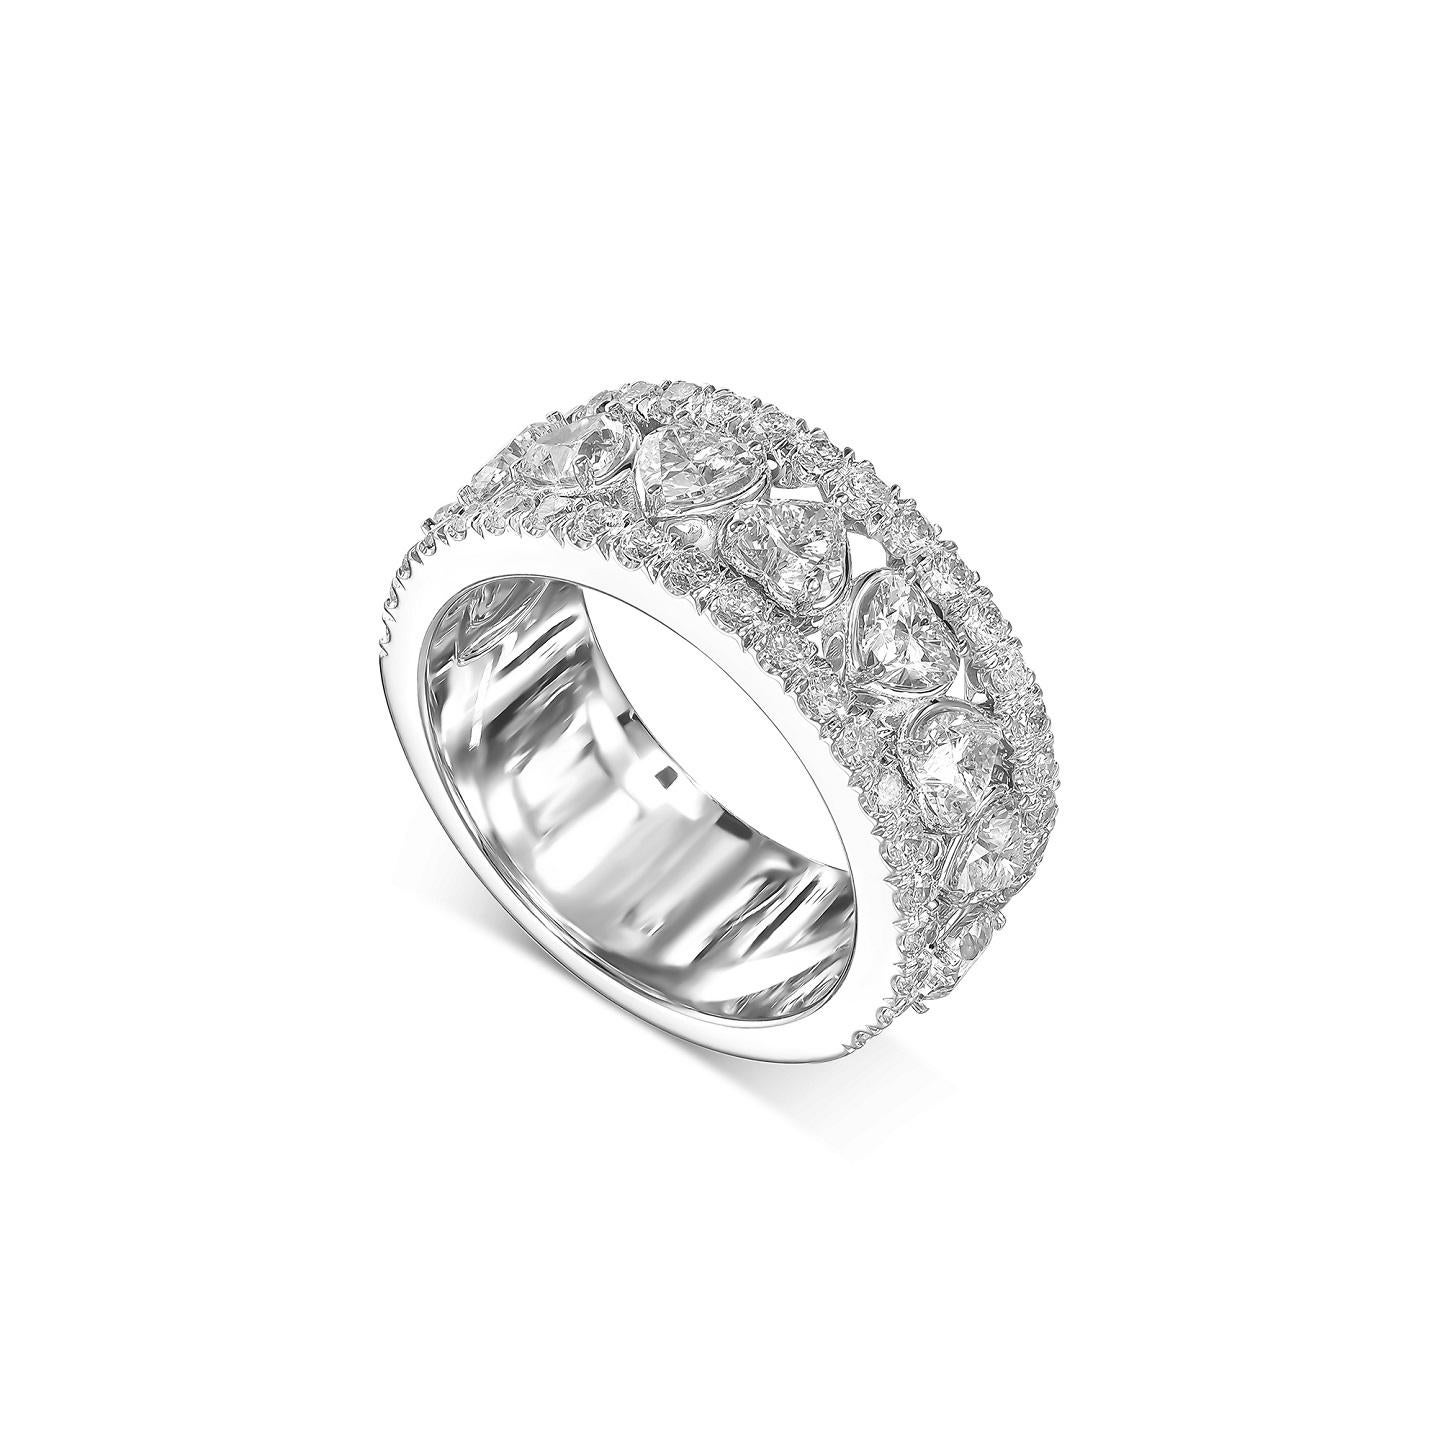 Our Dazzling Eternity Ring is handcrafted from heart shaped cut diamonds as well as round cut diamonds. Matching diamond hearts require perfection and knowledge which translates to an eye catching lushness. The high quality diamonds are mounted on